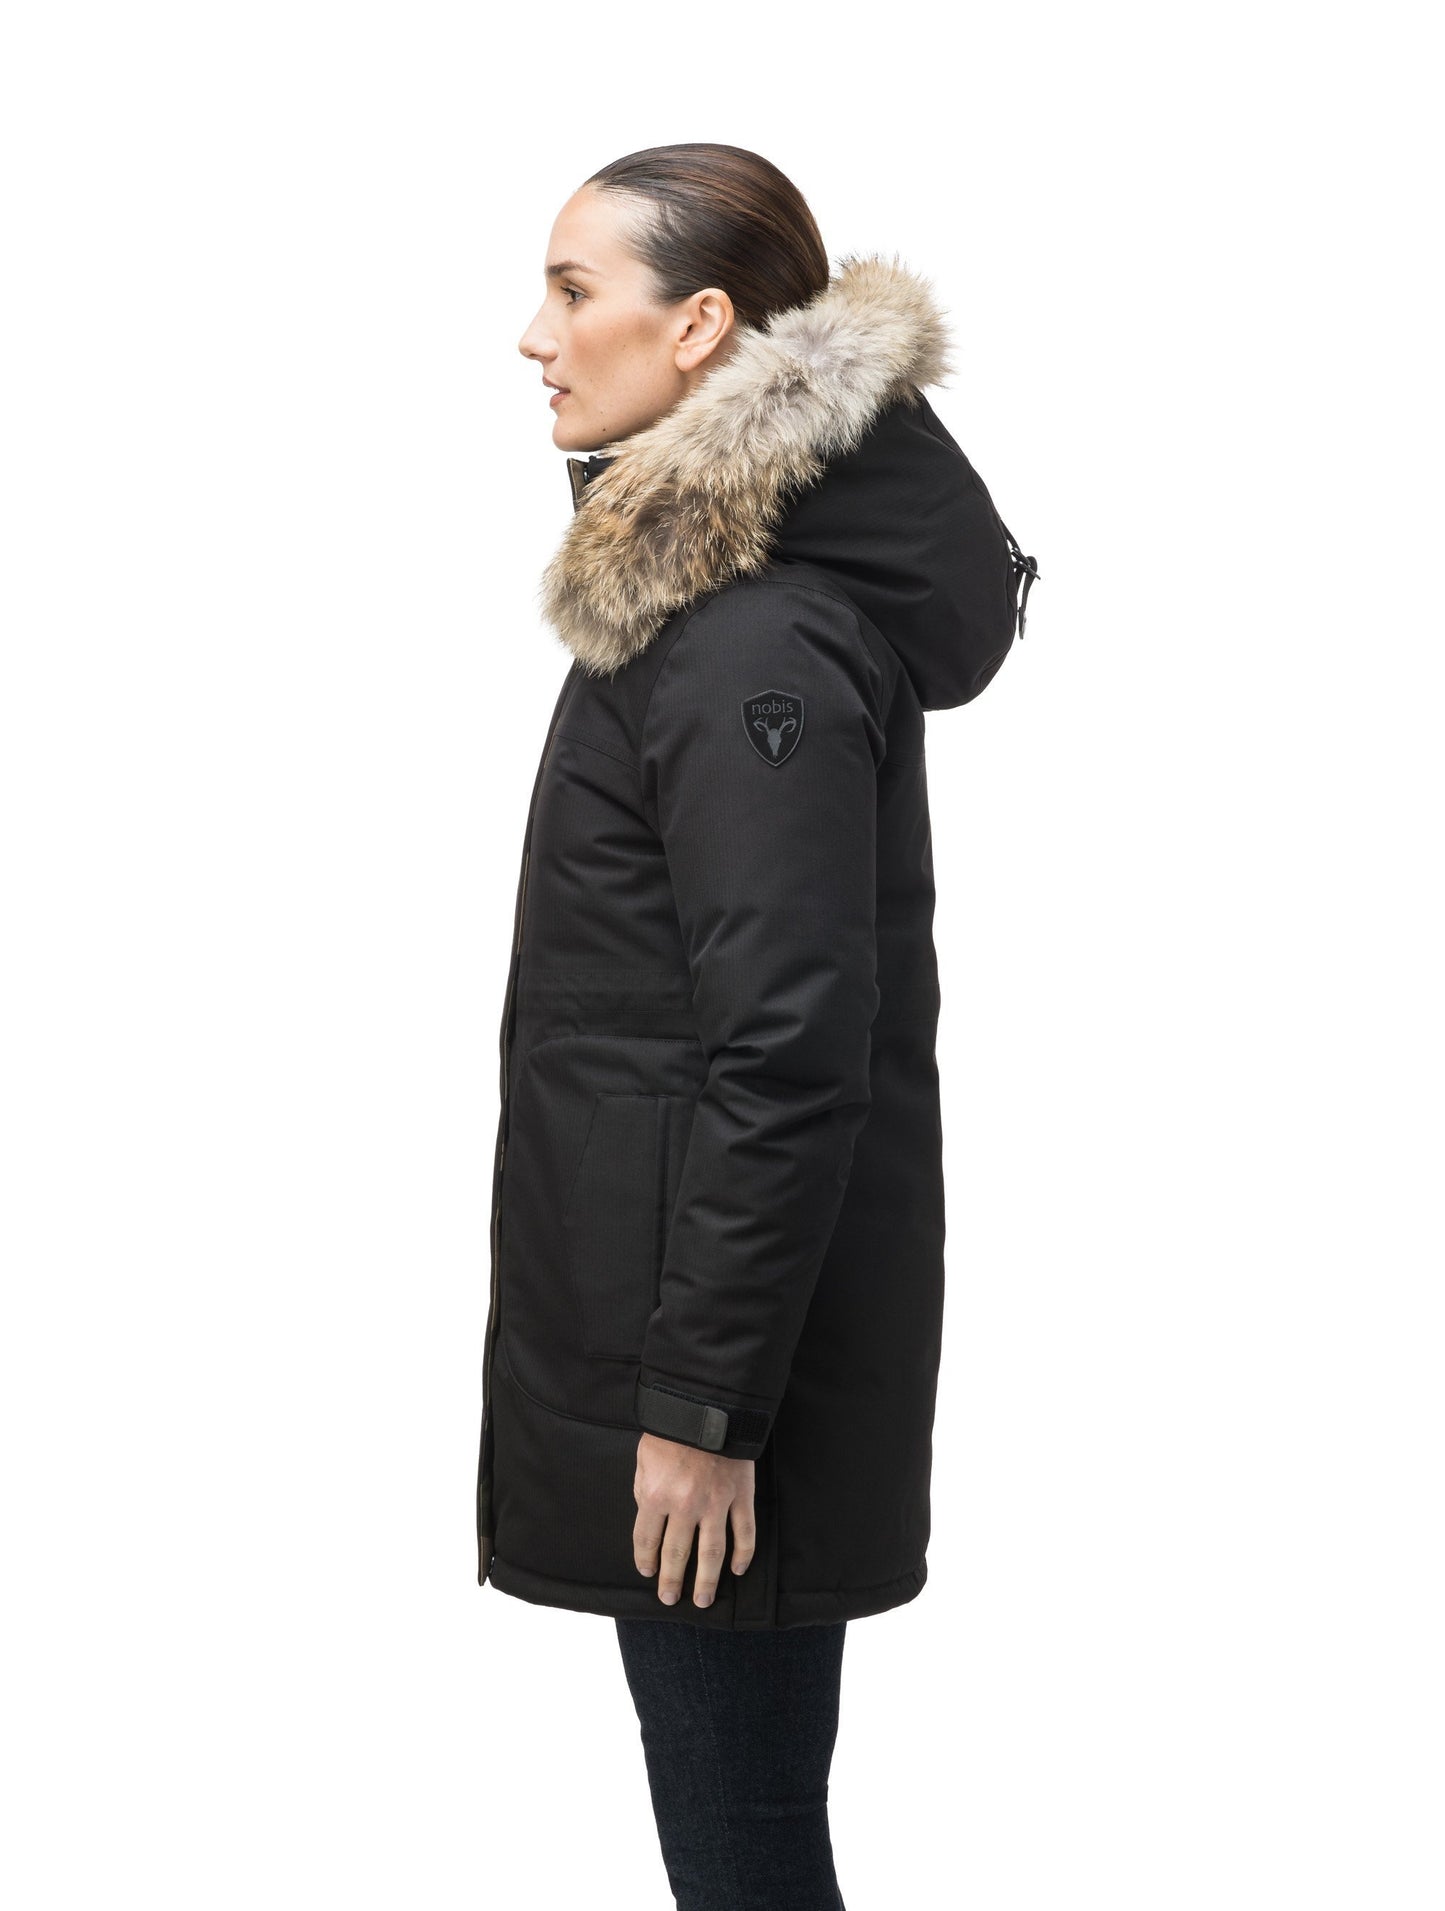 Thigh length women's down filled parka with side entry pockets and drawcord waist, removable hood and fur trim in Black